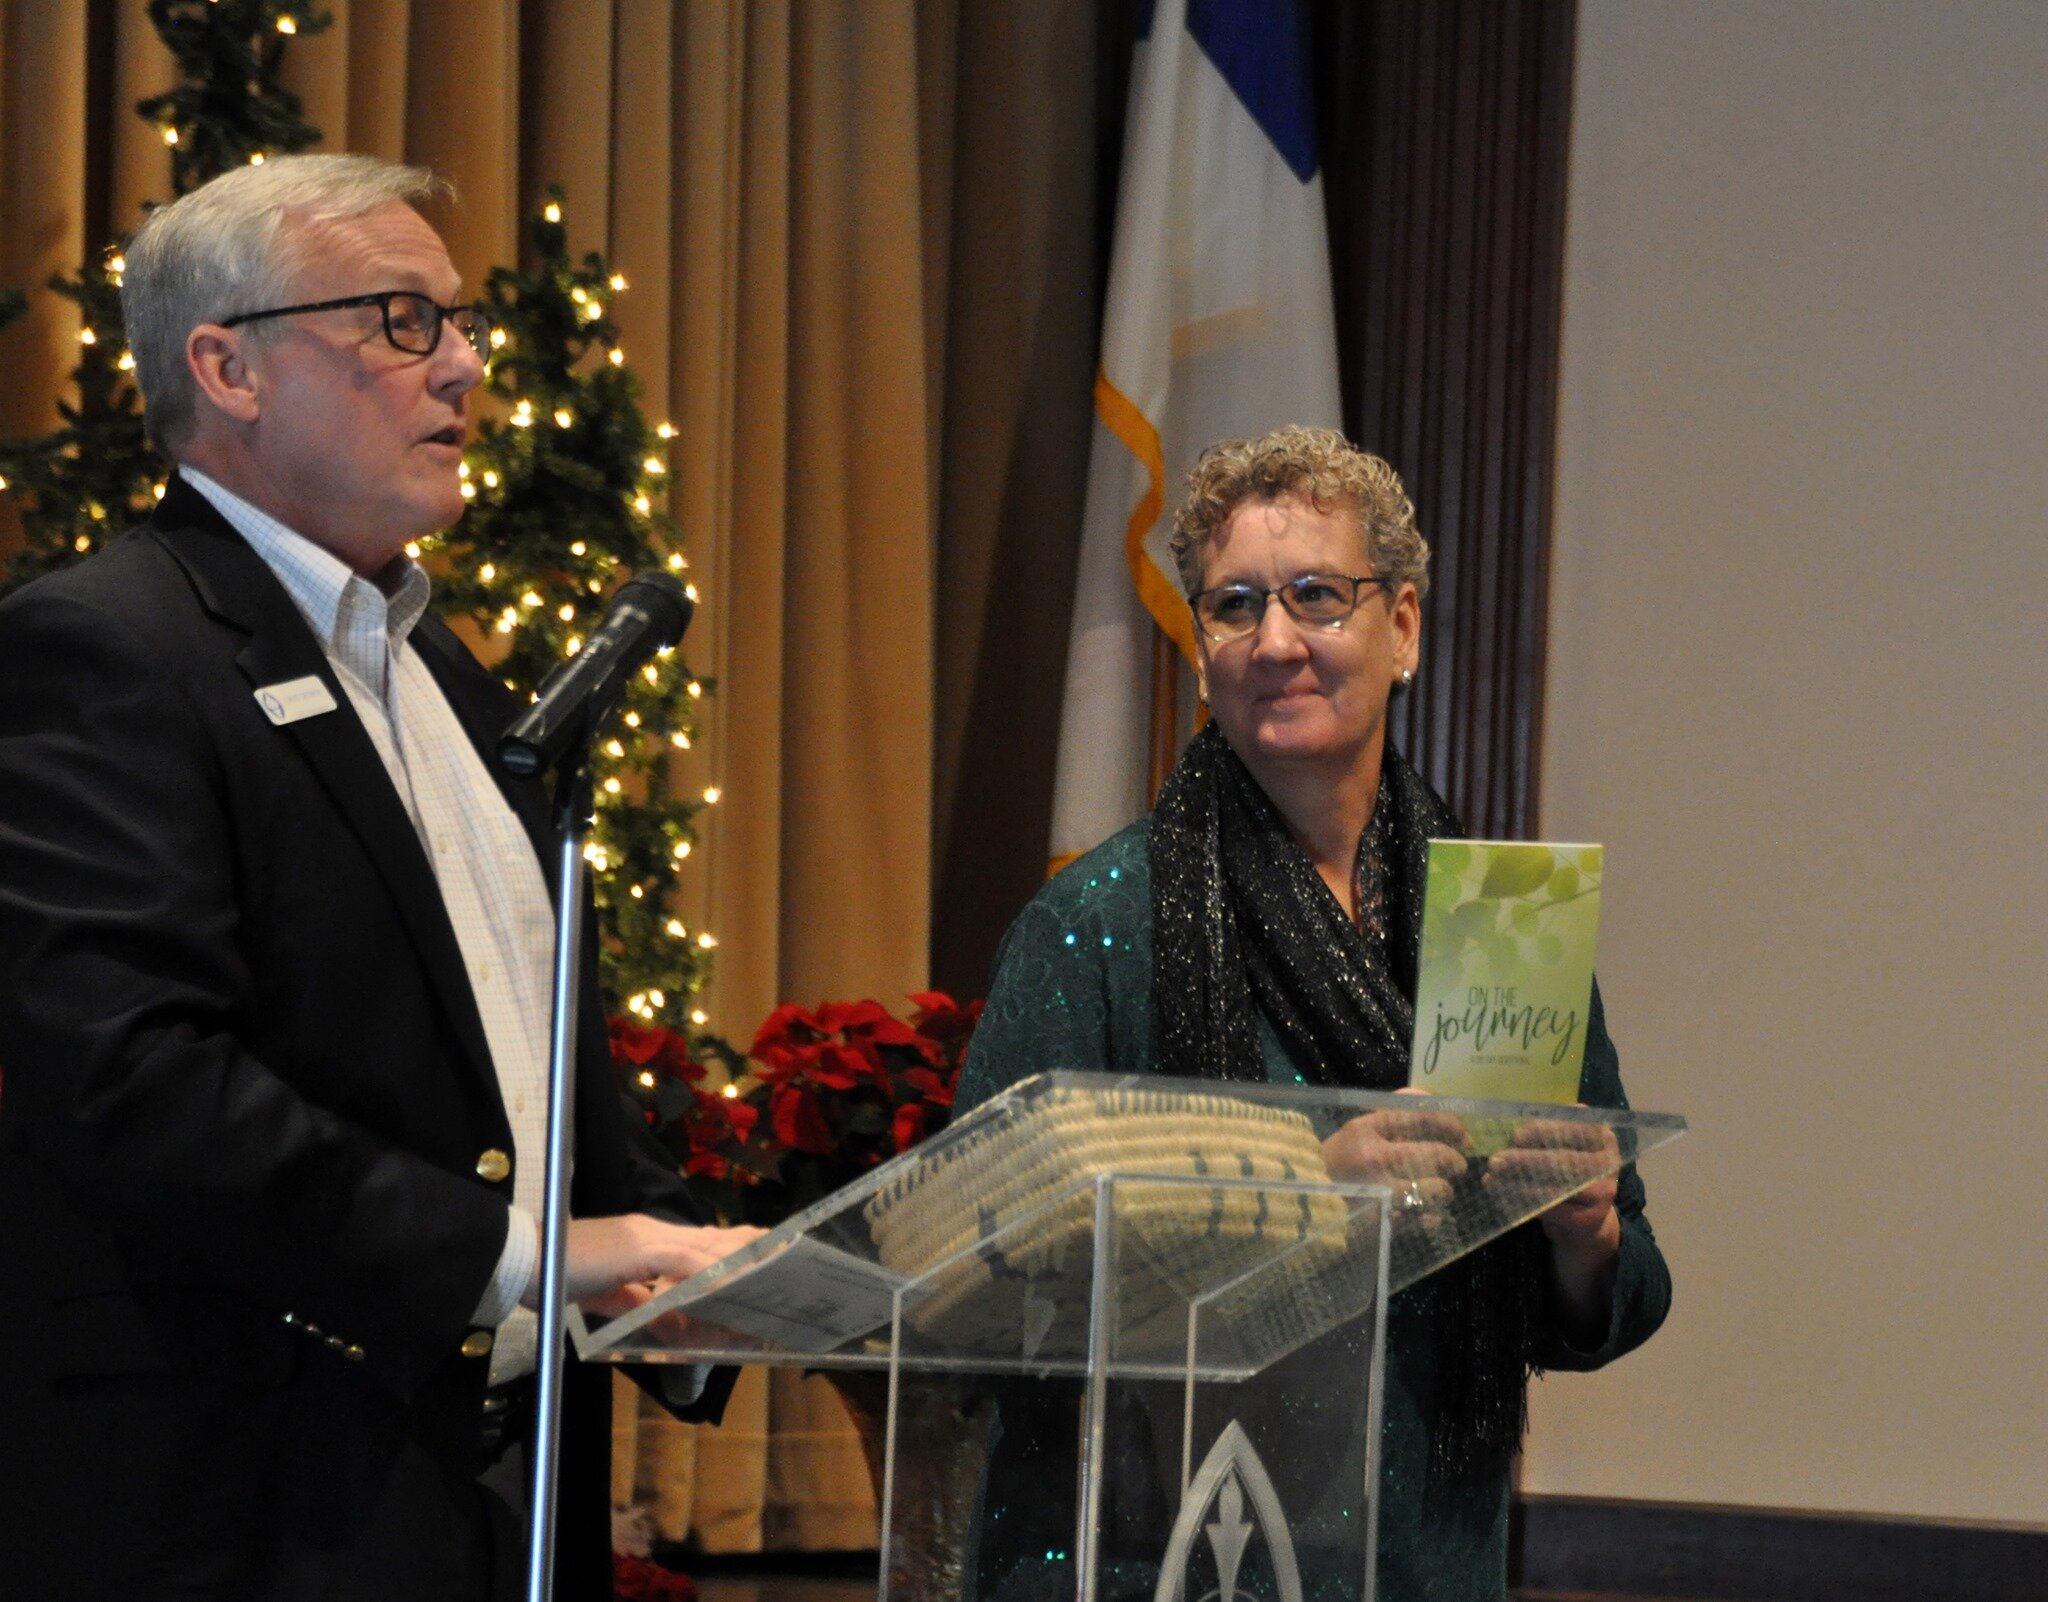 WMU Foundation president, David George, and WMU executive director, Sandy Wisdom-Martin, partner together at a previous WMU Week of Prayer event in 2019.